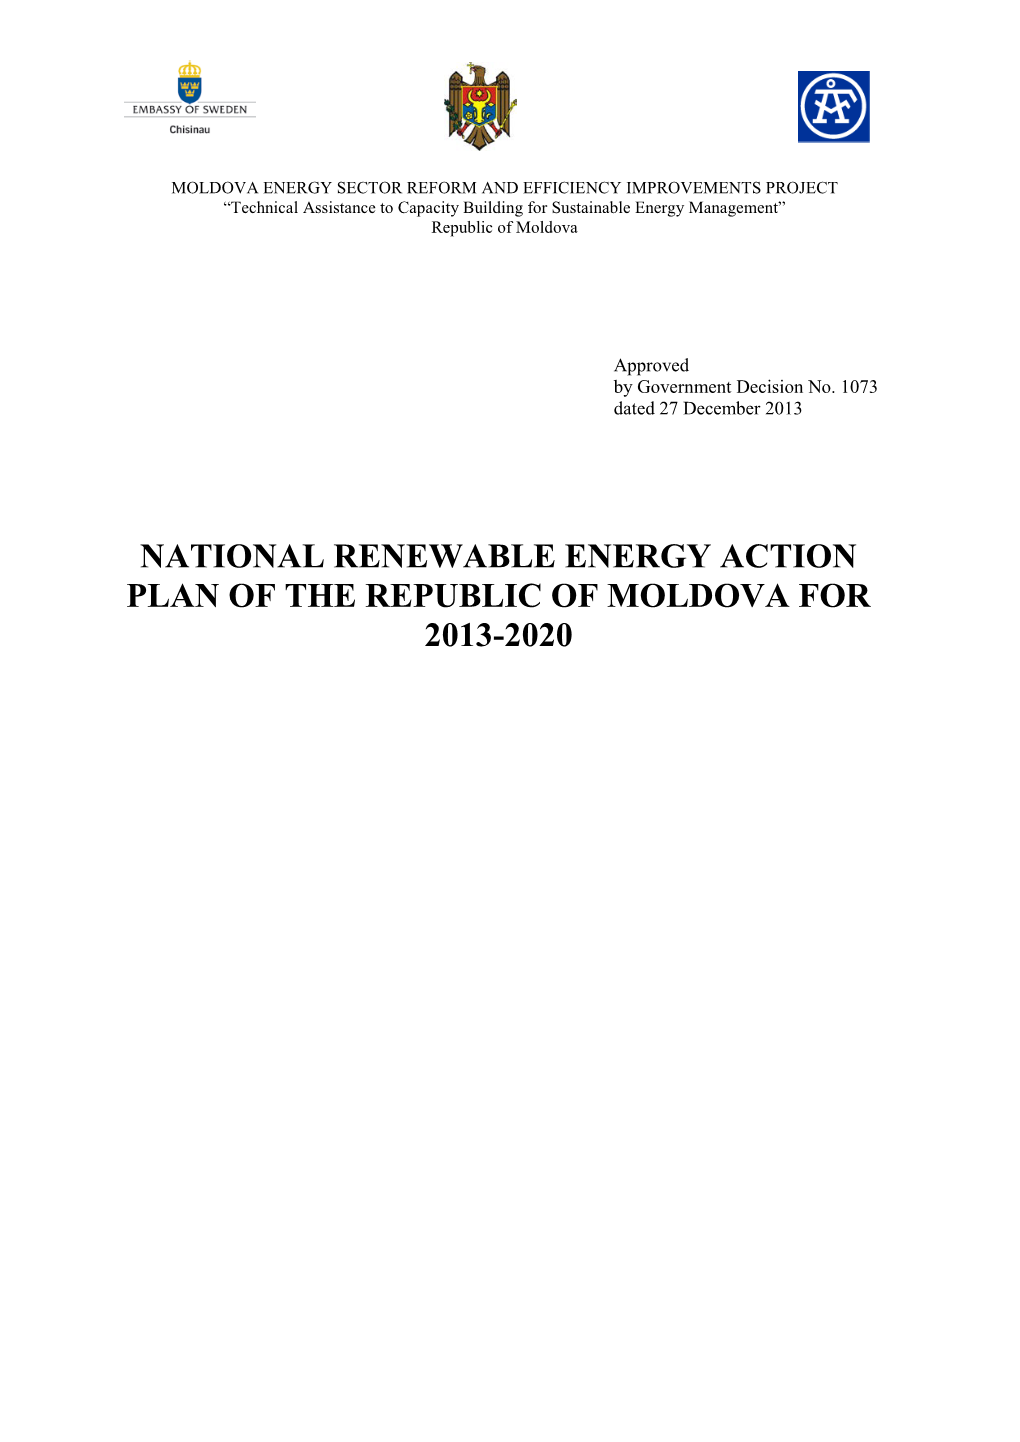 National Renewable Energy Action Plan of the Republic of Moldova for 2013-2020